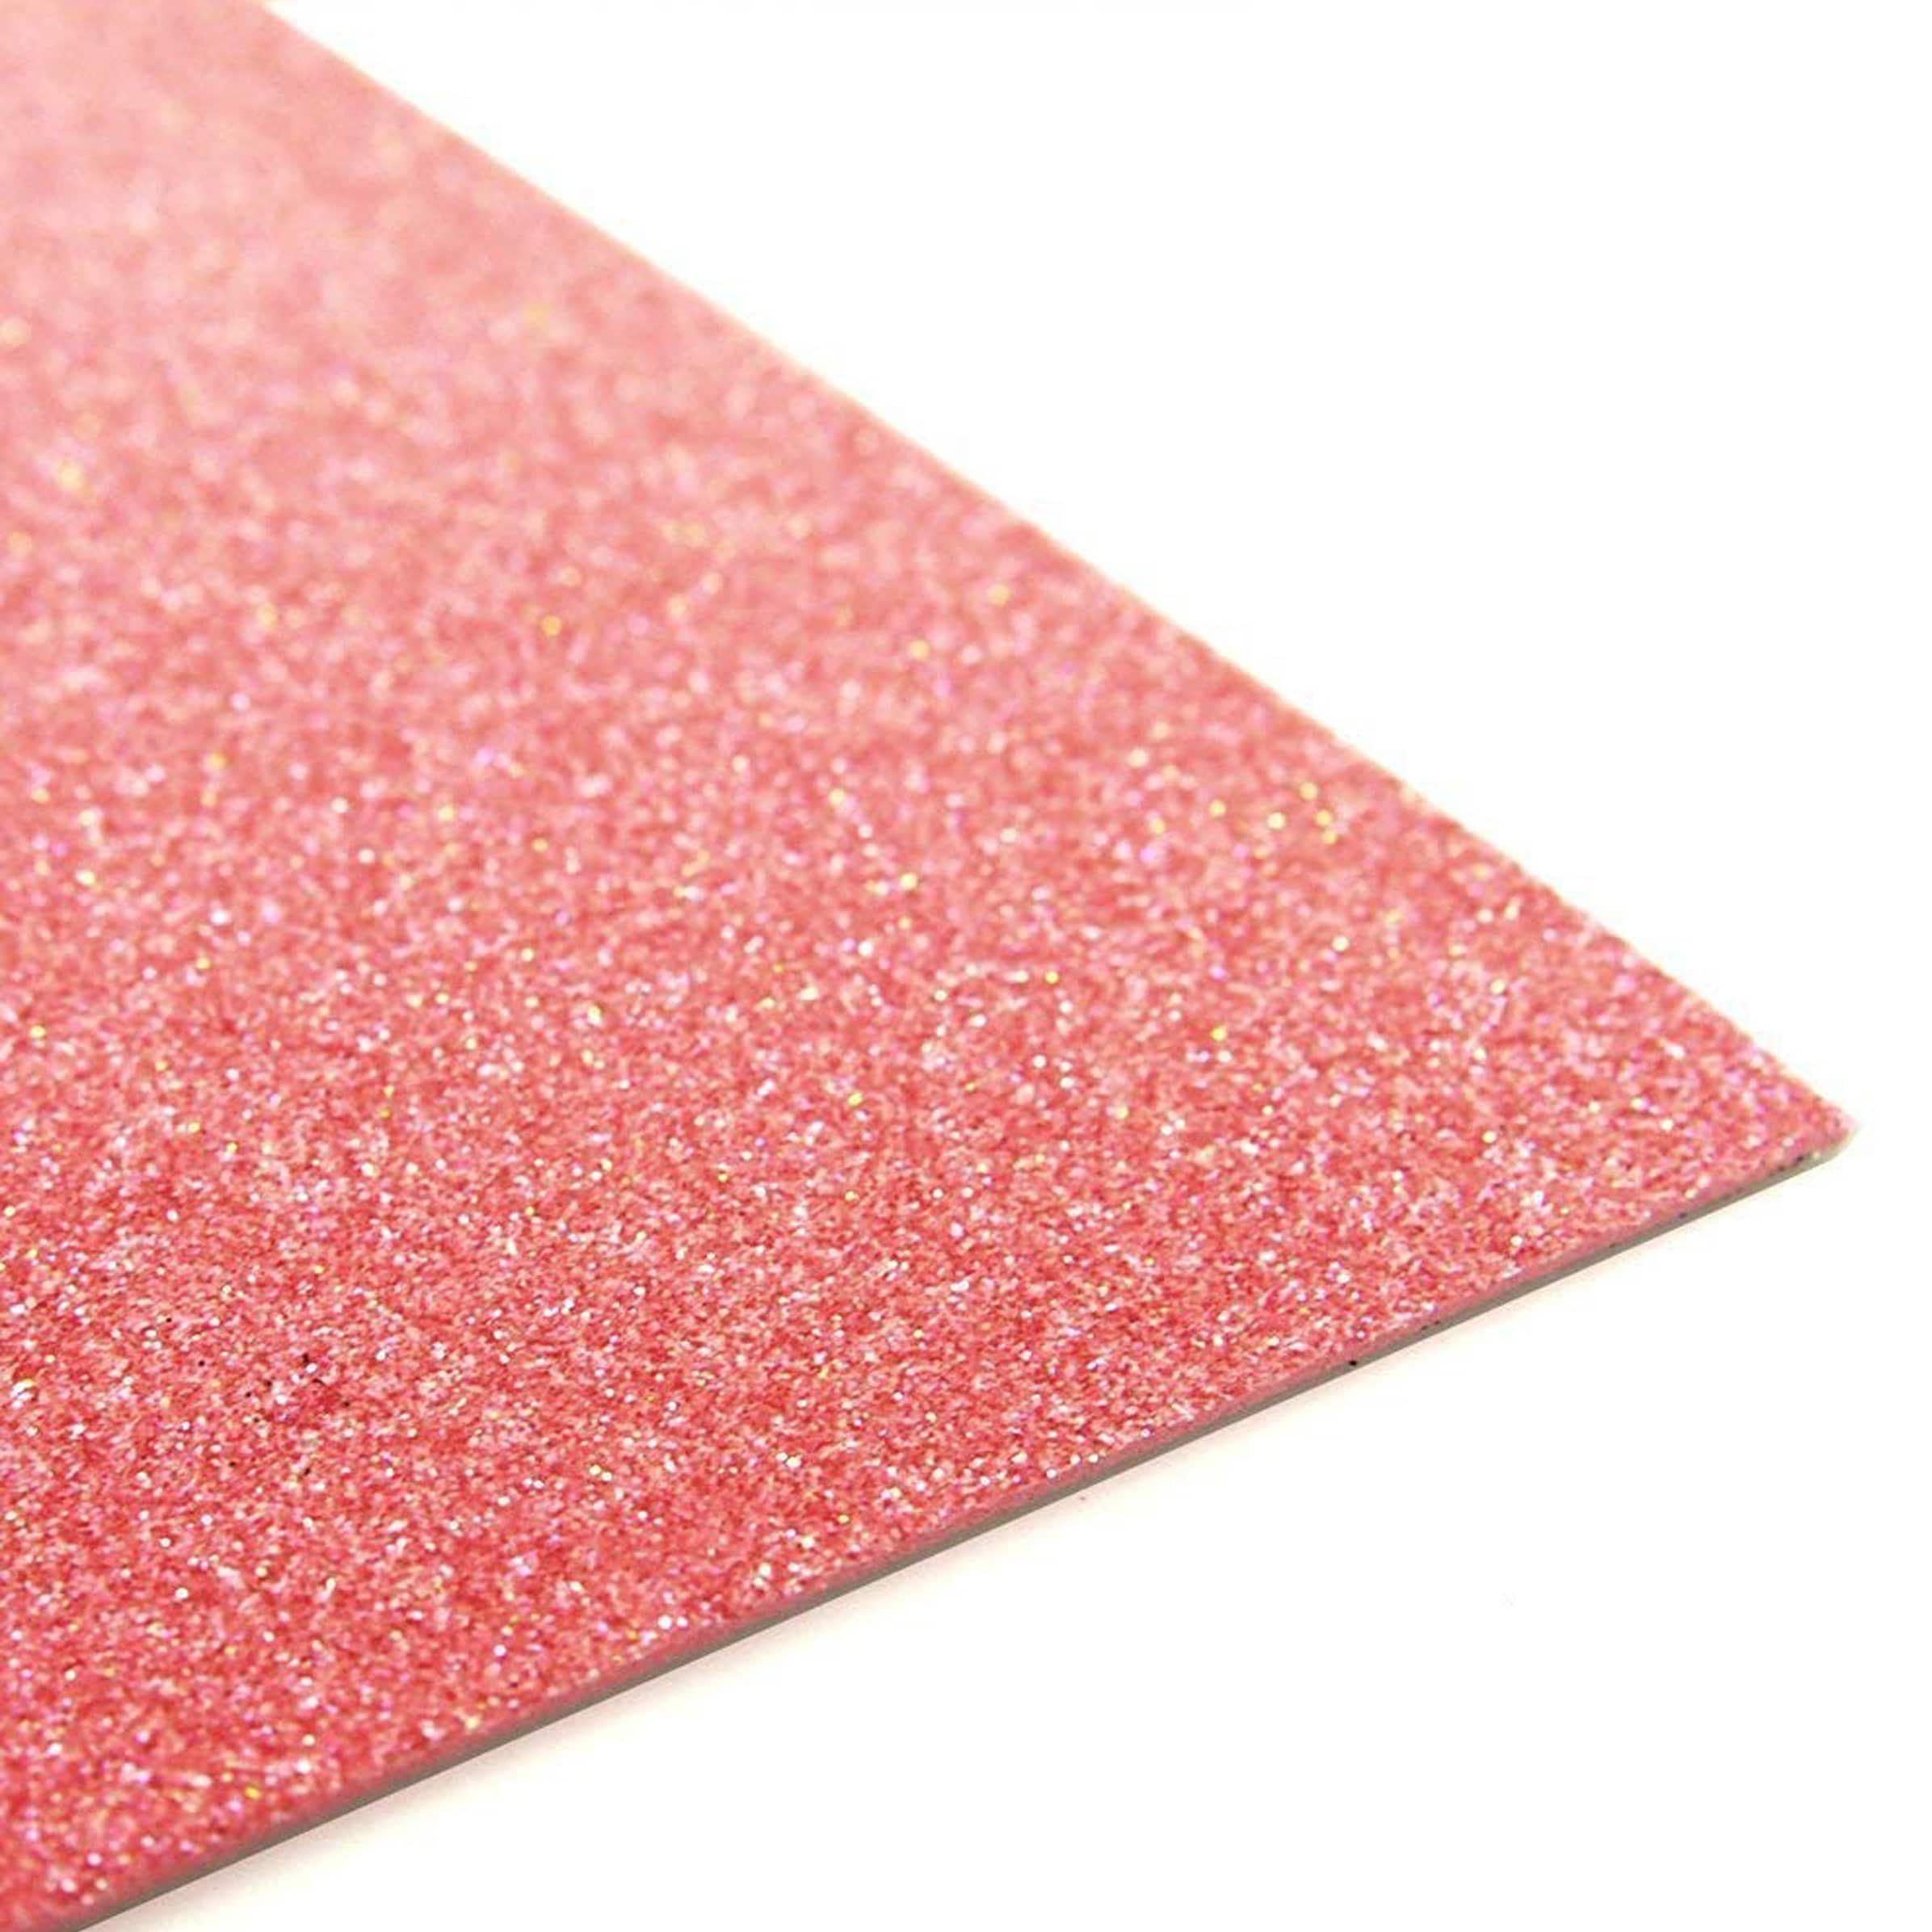 Glitter Craft Foam Sheet Pink - 2mm 9-inches by 12-inches